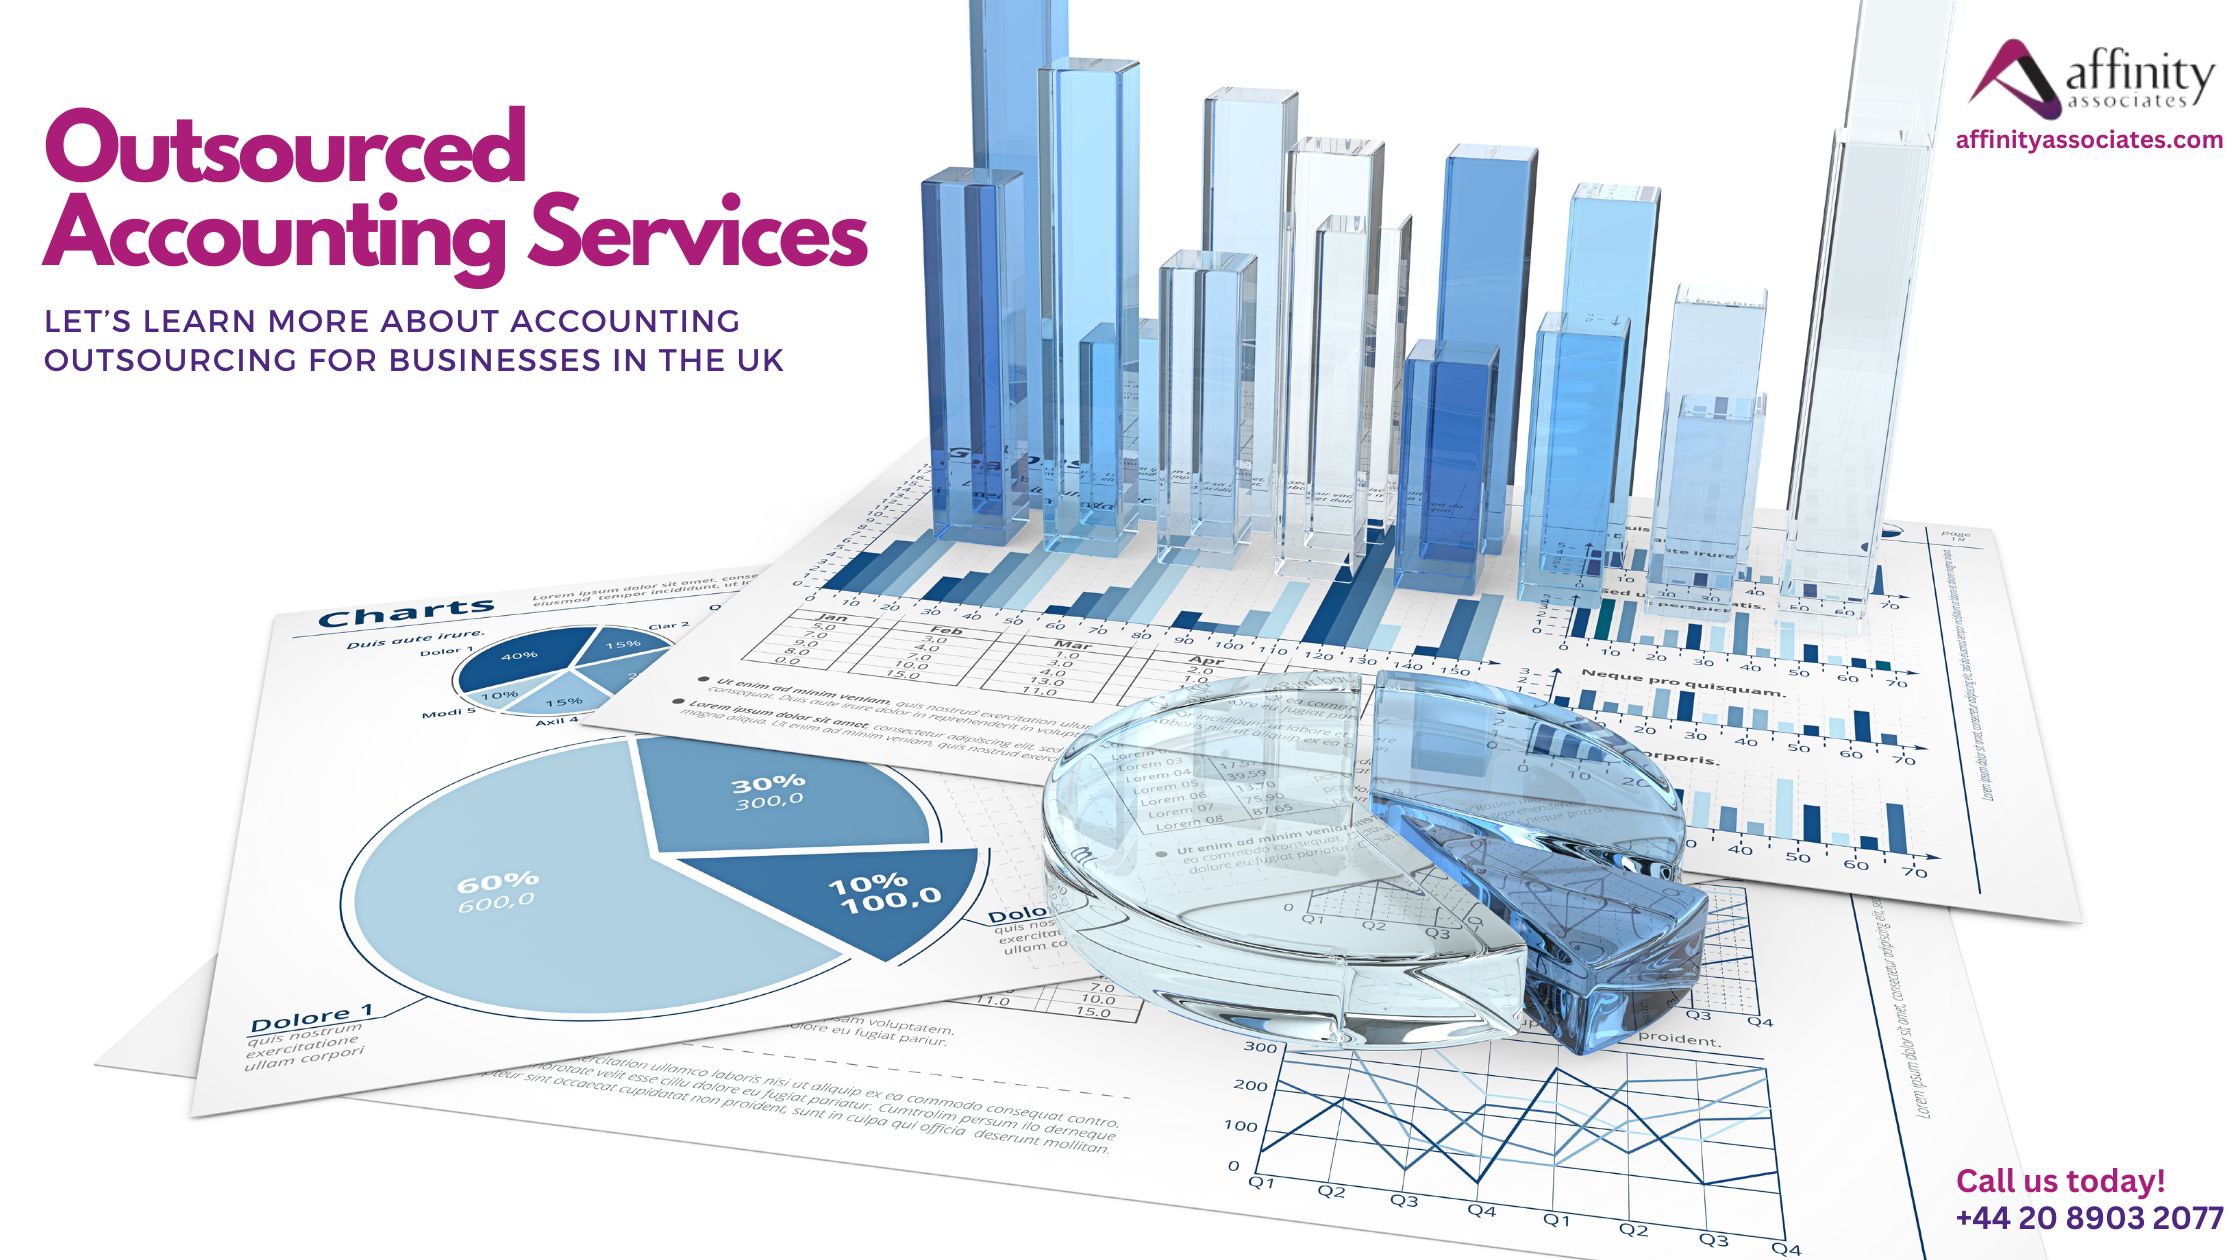 Outsourced Accounting Services – Let’s Learn More About Accounting Outsourcing for Businesses in the UK